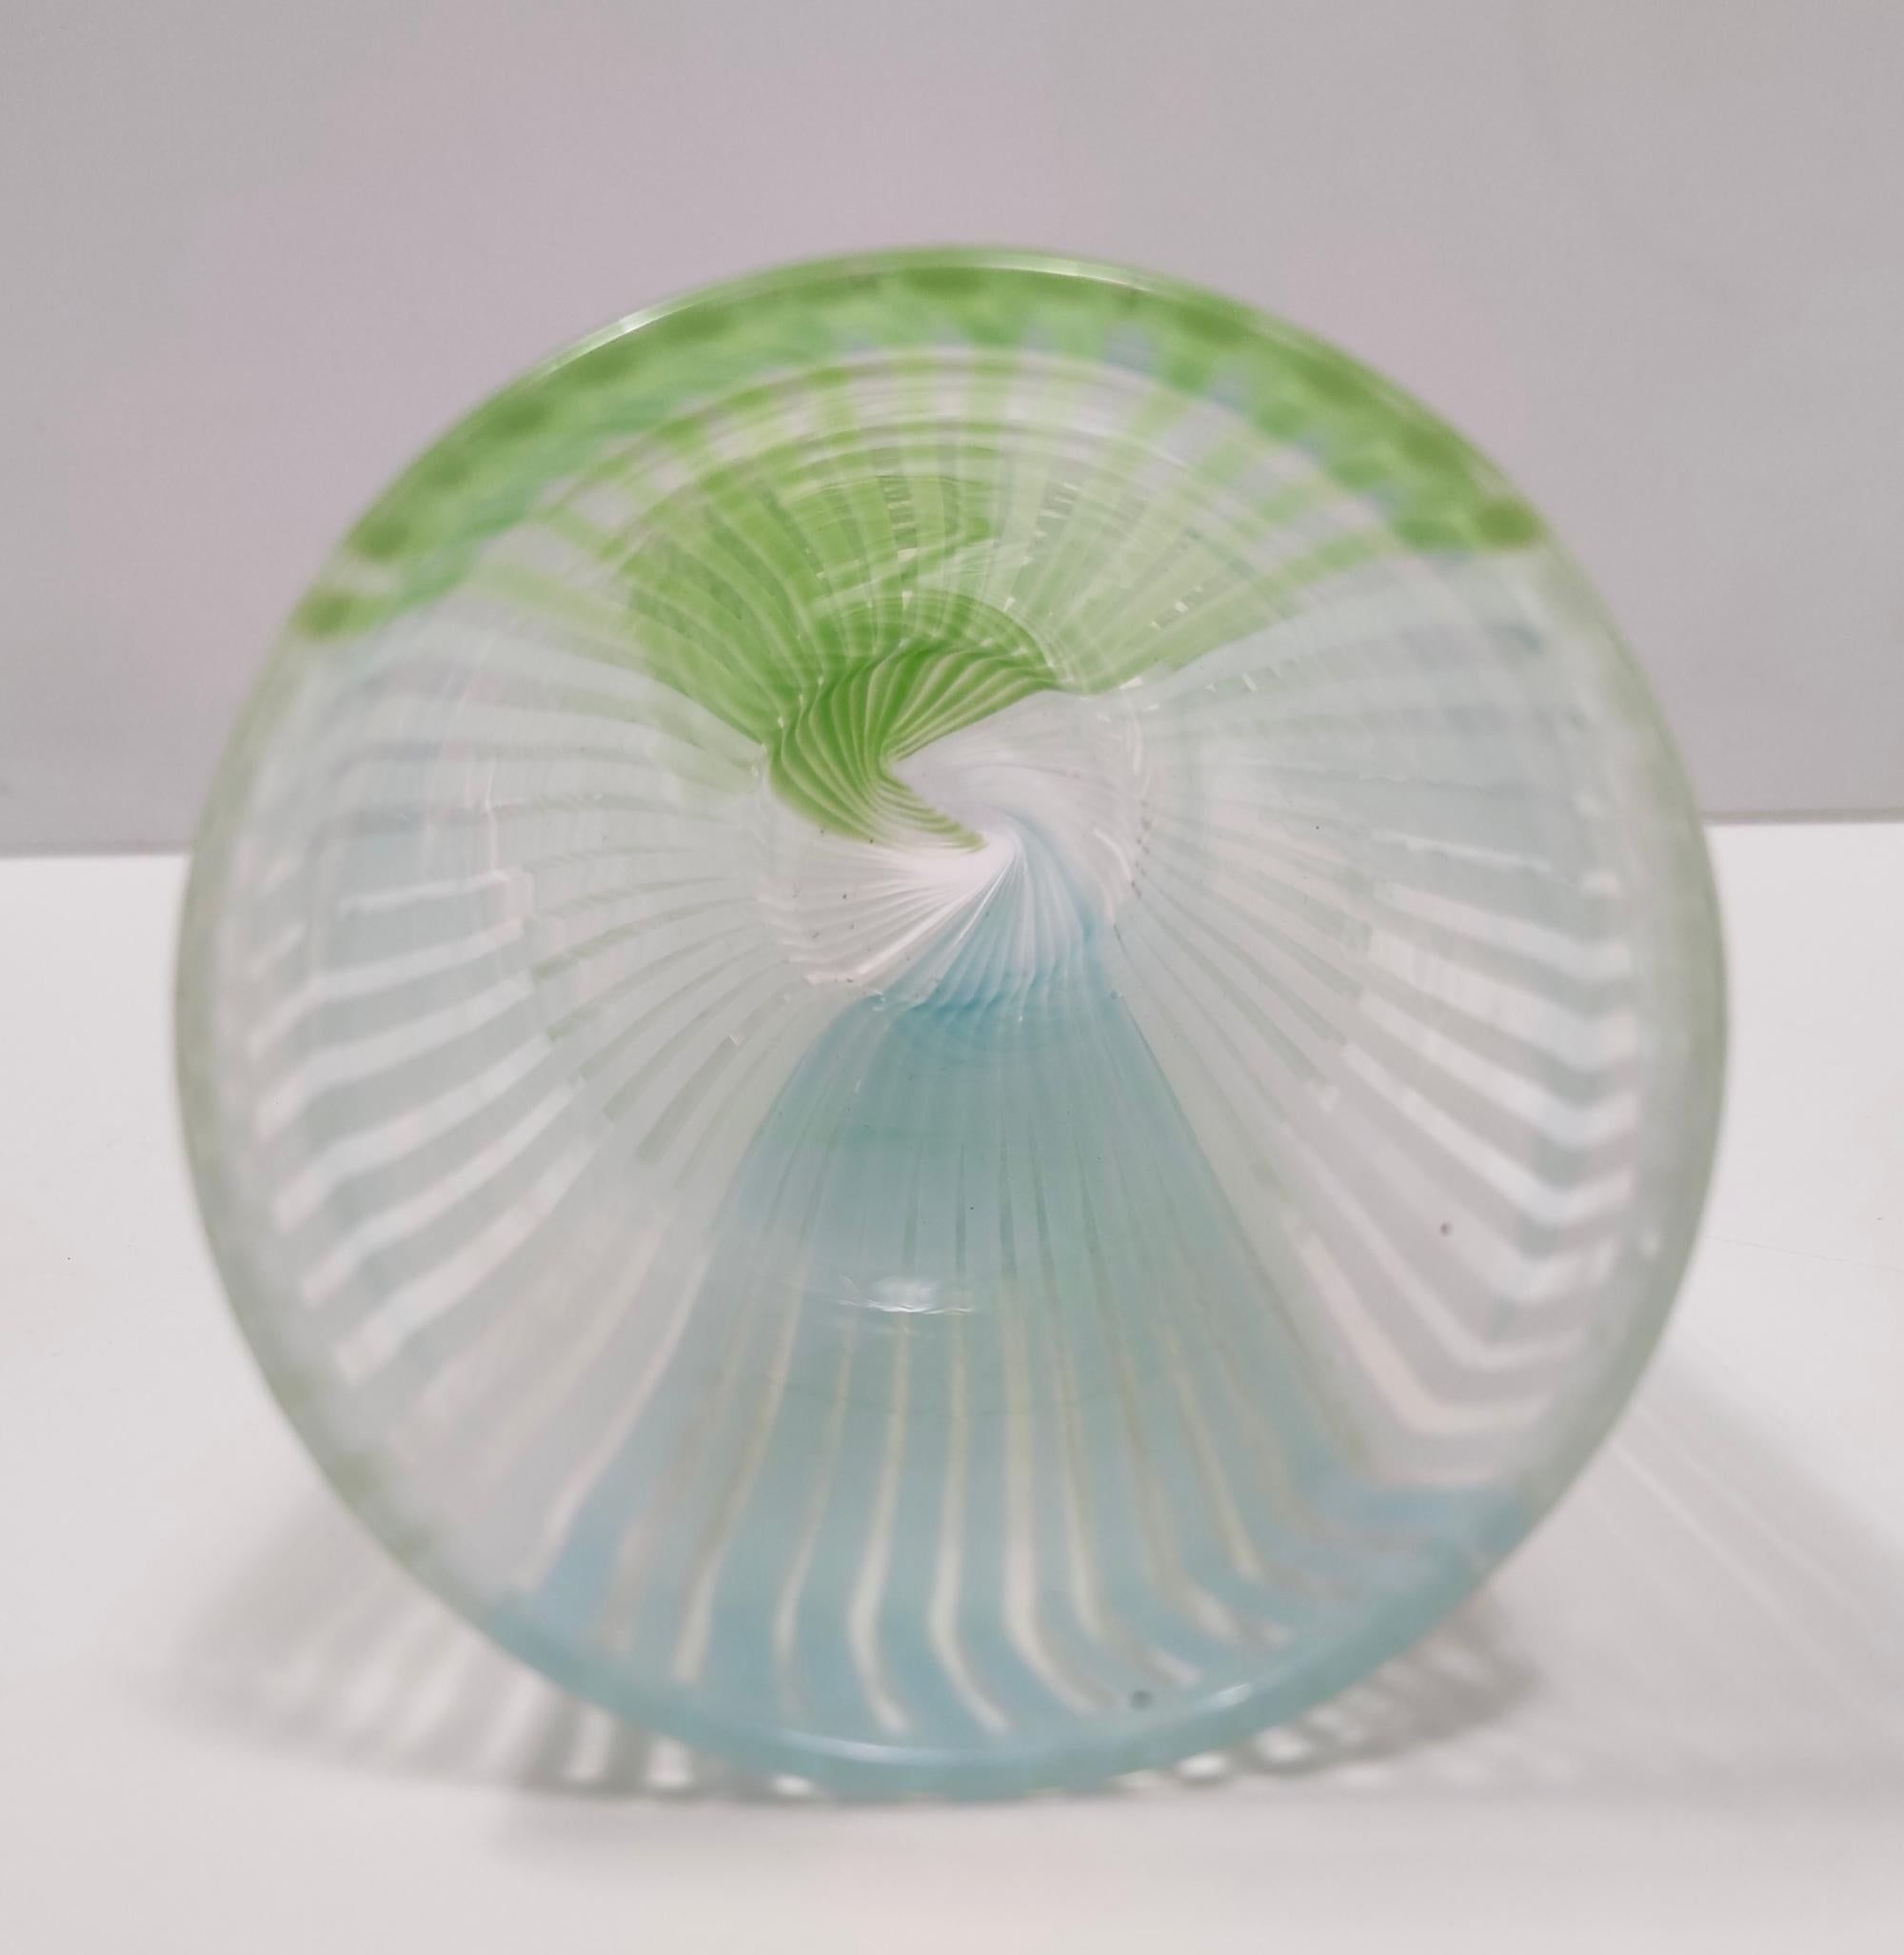 Mid-20th Century Vintage Green, White and Light Blue Murano Glass Vase by Dino Martens For Sale